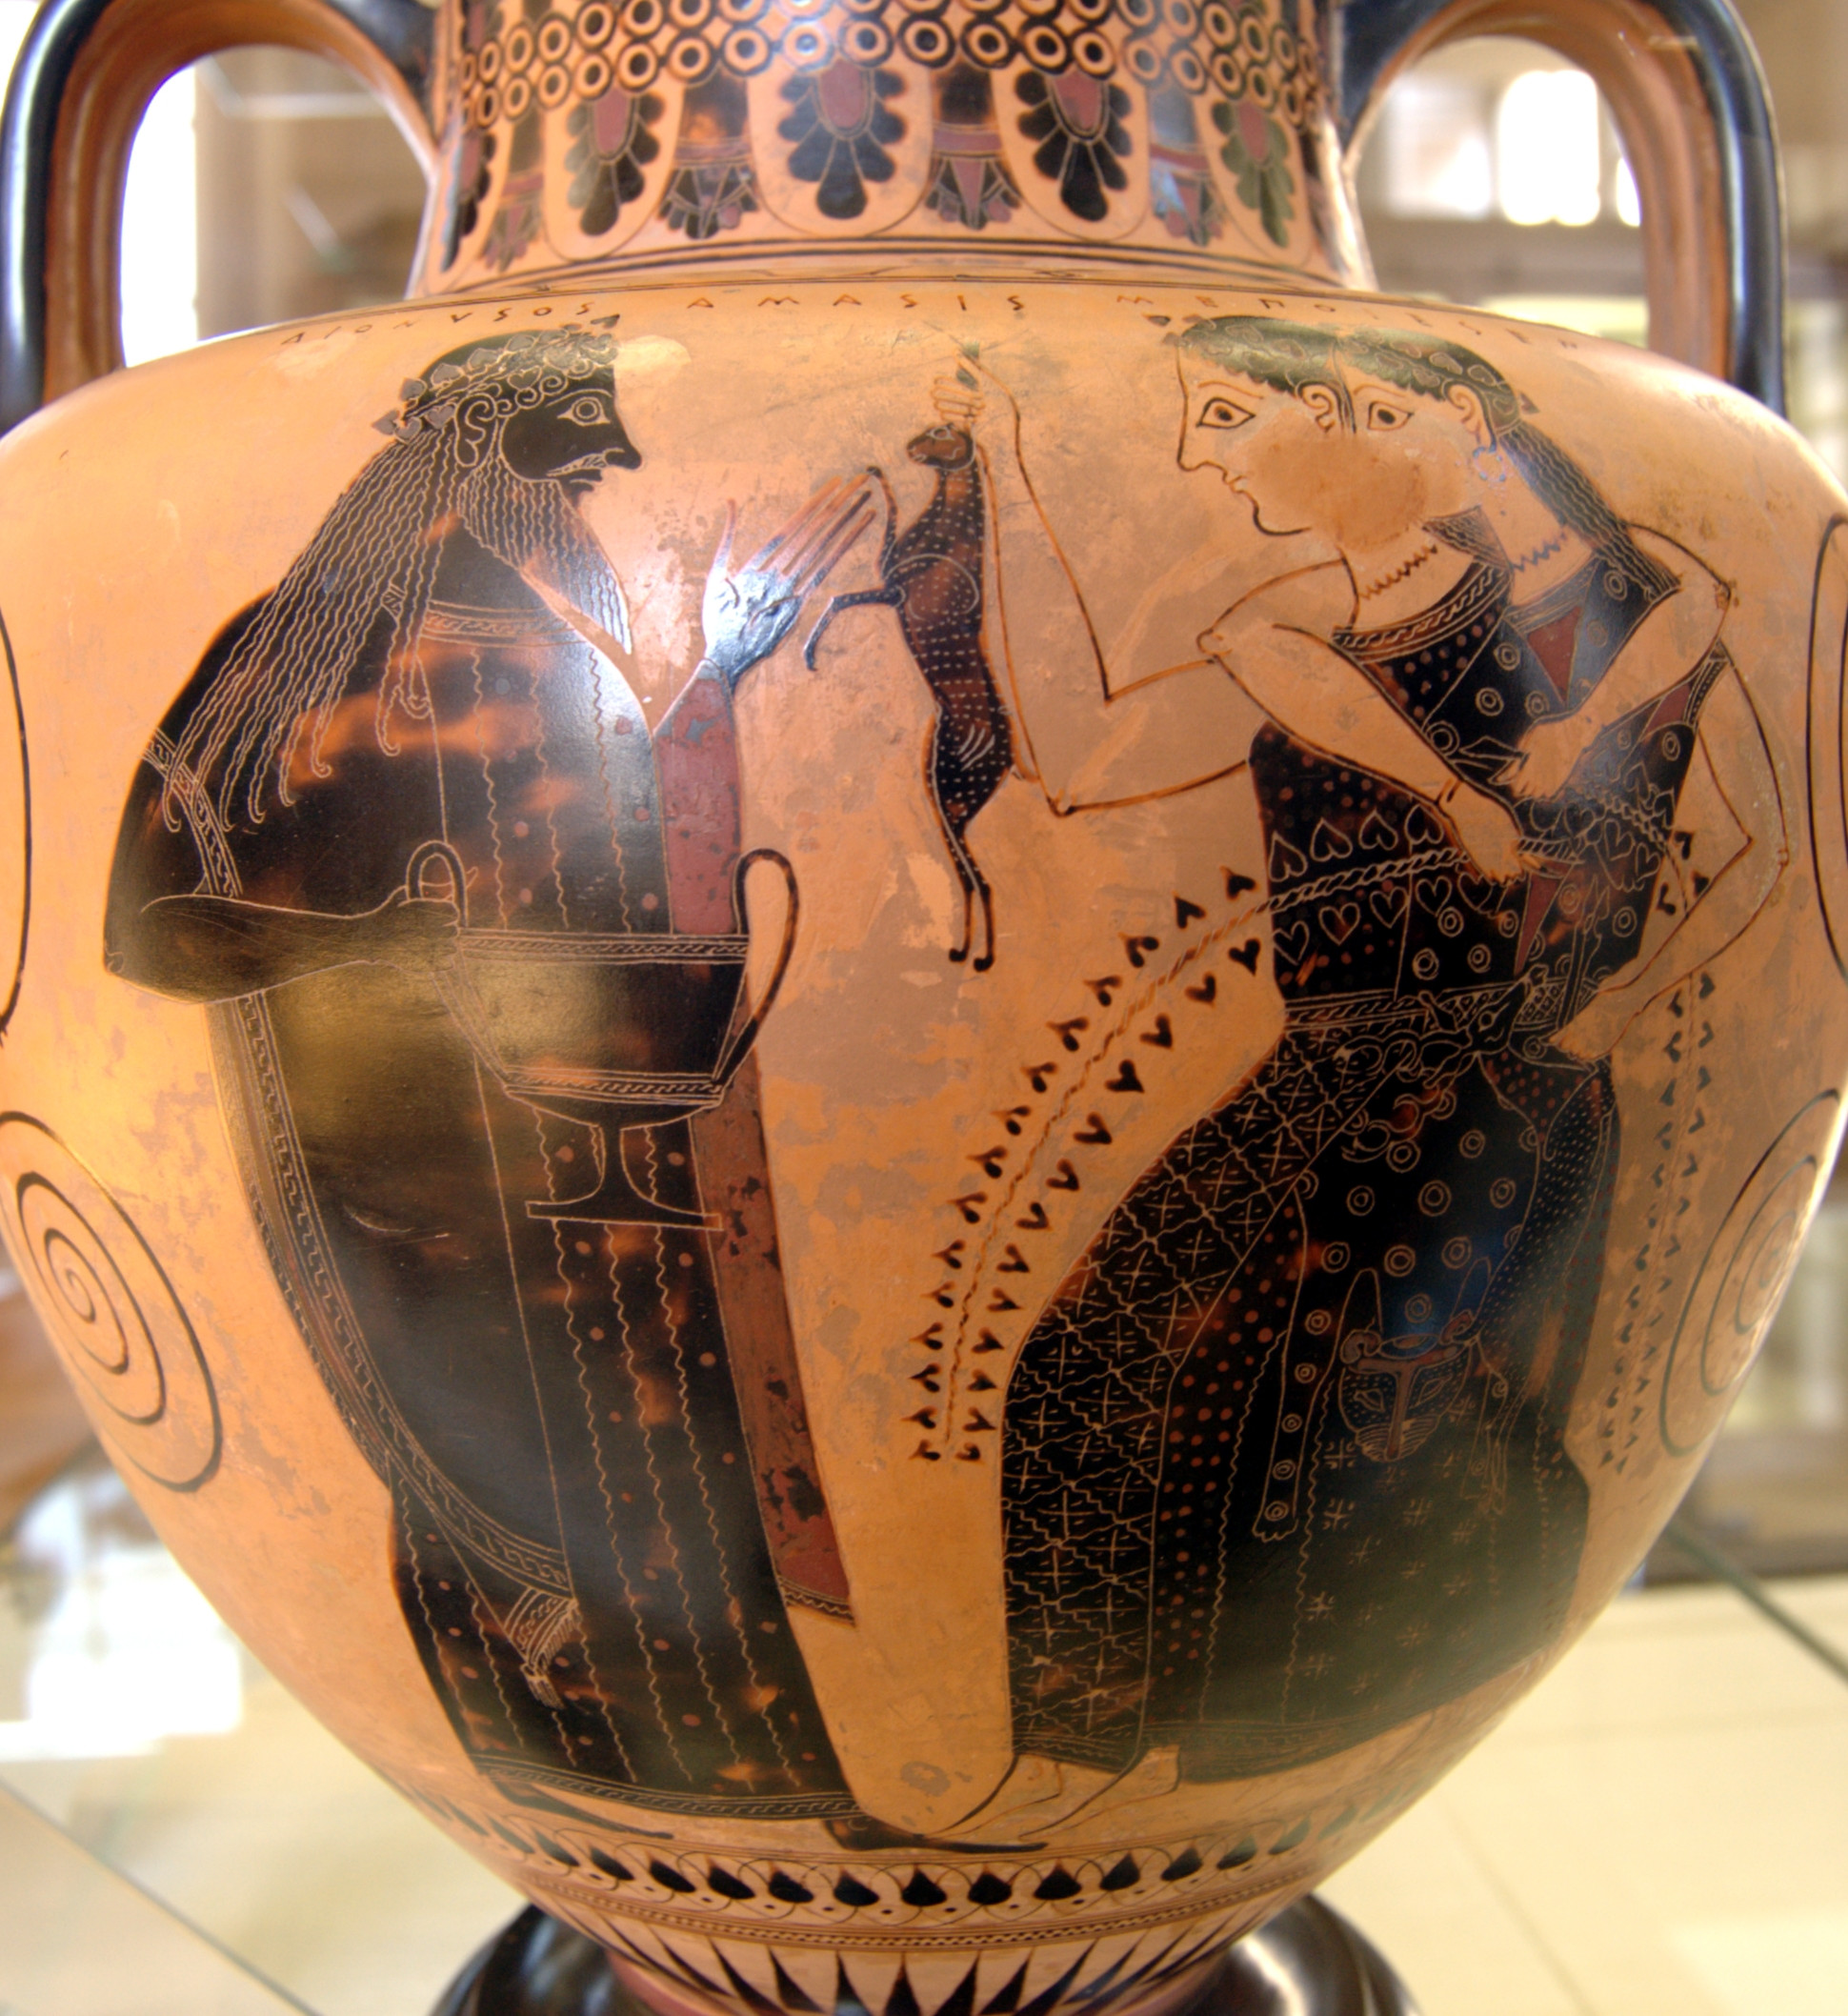 26 Fantastic Egyptian Vases for Sale 2024 free download egyptian vases for sale of black figure pottery wikipedia throughout dionysus and two maenads one holding a hare neck amphora ca 550 530 bc from vulci now cabinet des madailles de la bibliot